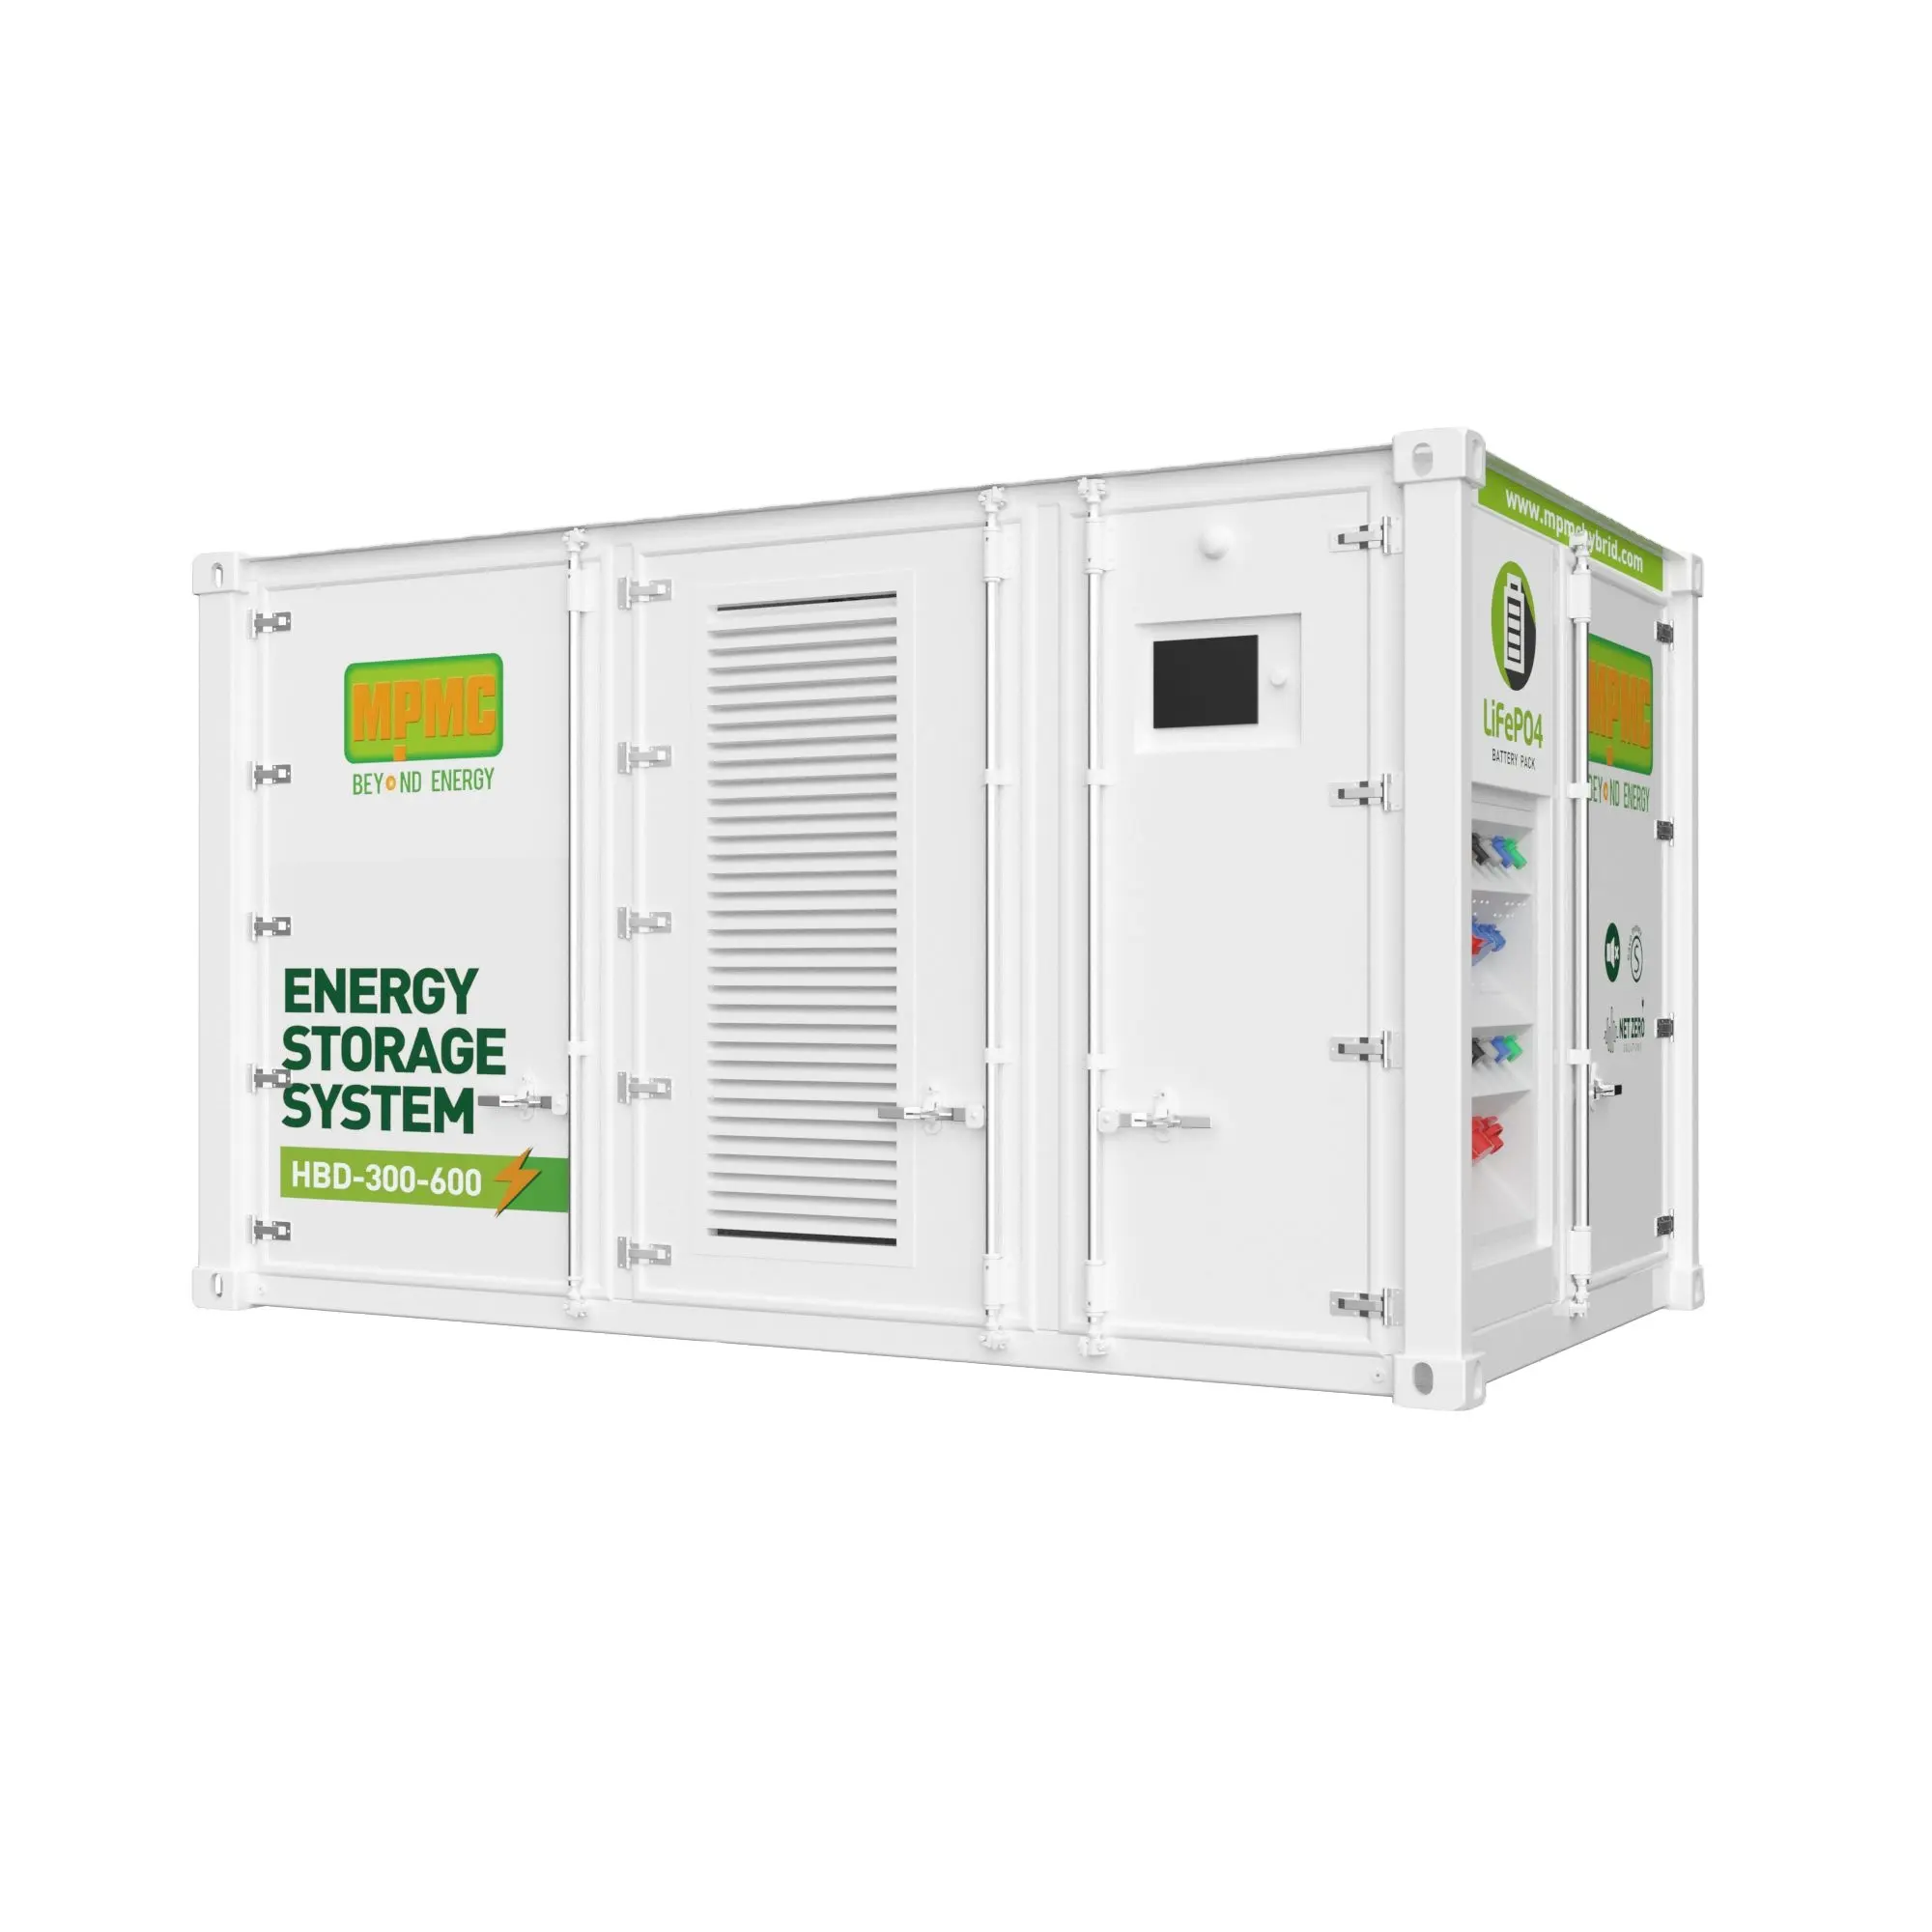 MPMC Commercial Solar Energy System Energy Storage Container 300kw 600kwh off-Grid Industrial Solar System BESS